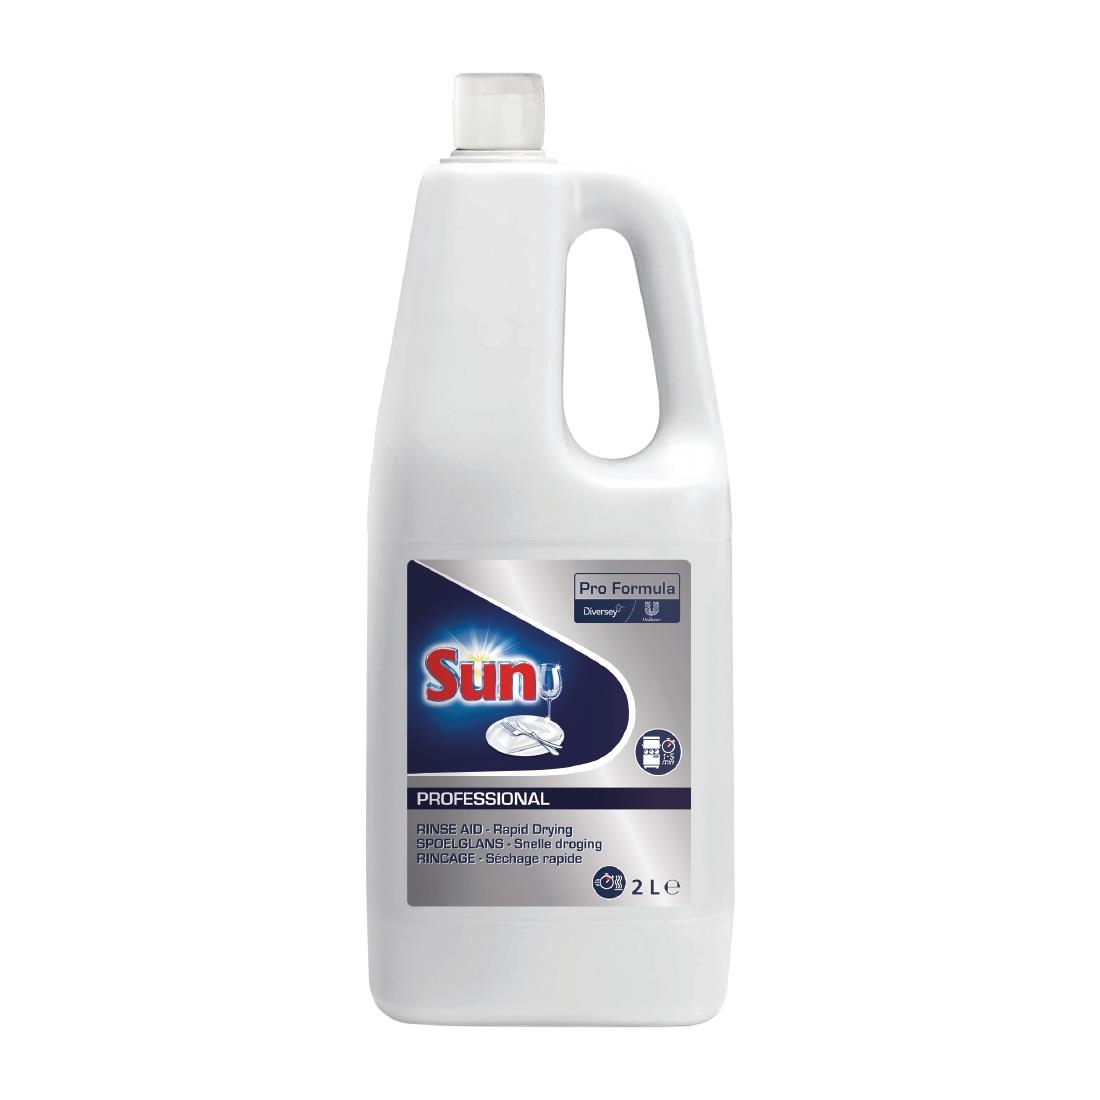 Sun Pro Formula Dishwasher Rinse Aid Concentrate 2Ltr (6 Pack)